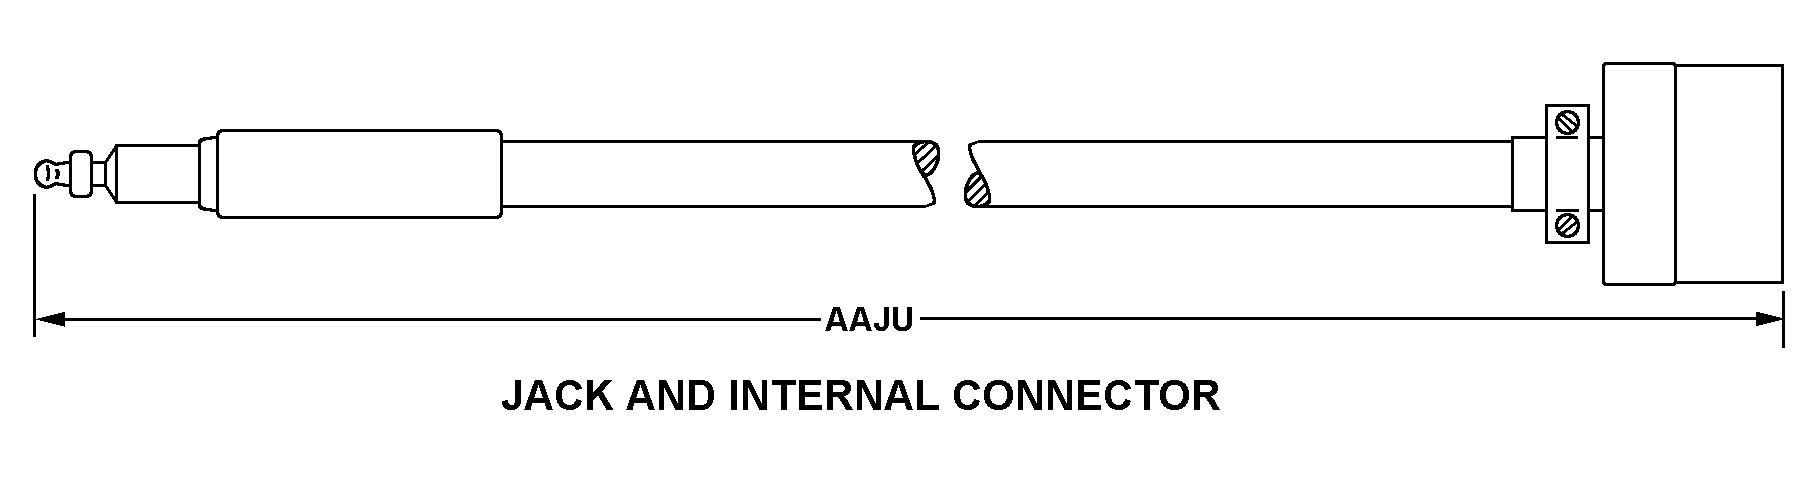 JACK AND INTERNAL CONNECTOR style nsn 5995-01-105-2693